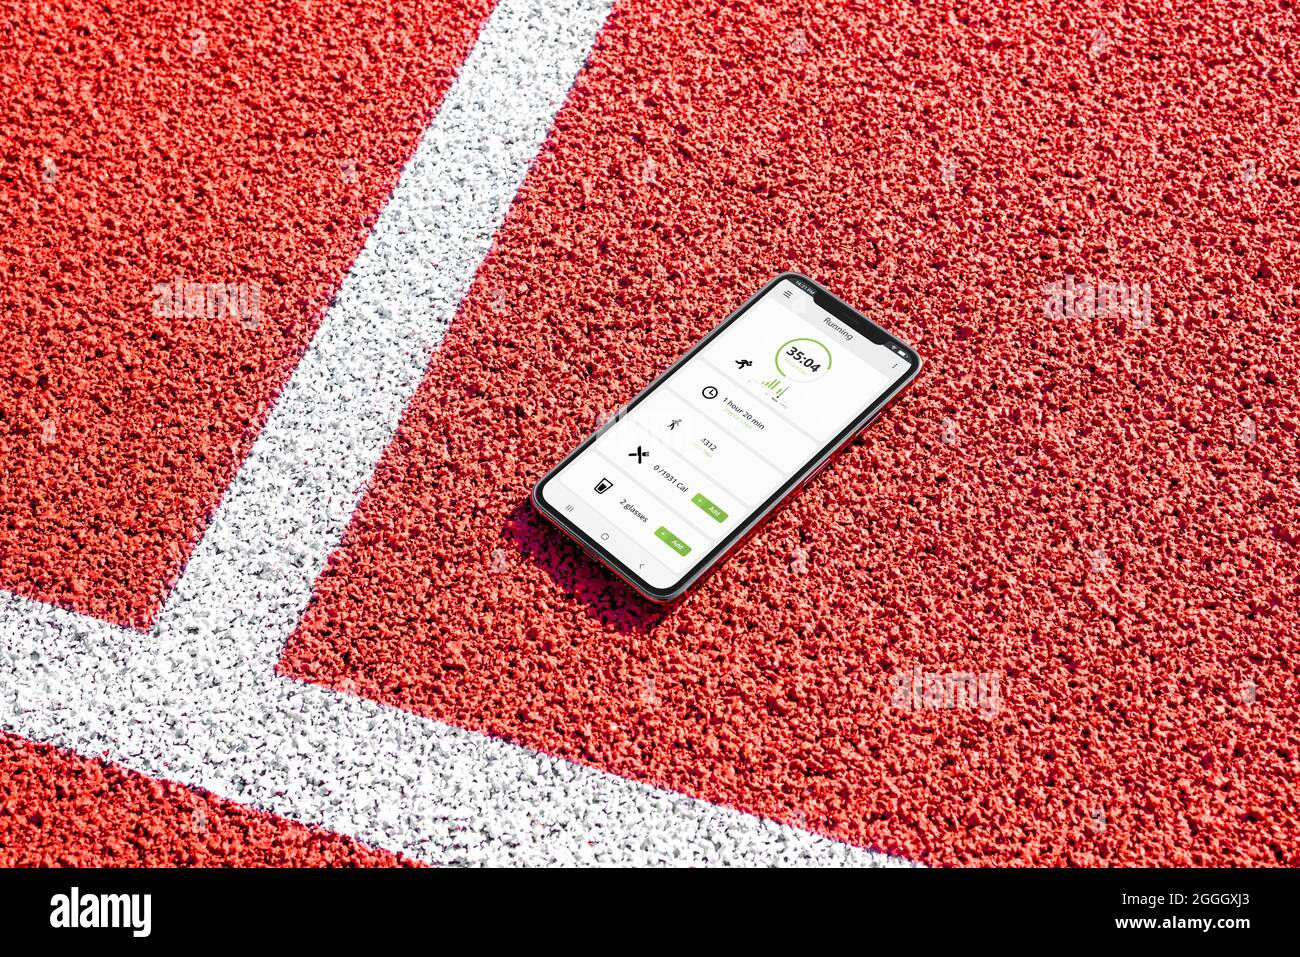 Phone with running app concept on athletics field. Time, distance and calories statistics Stock Photo